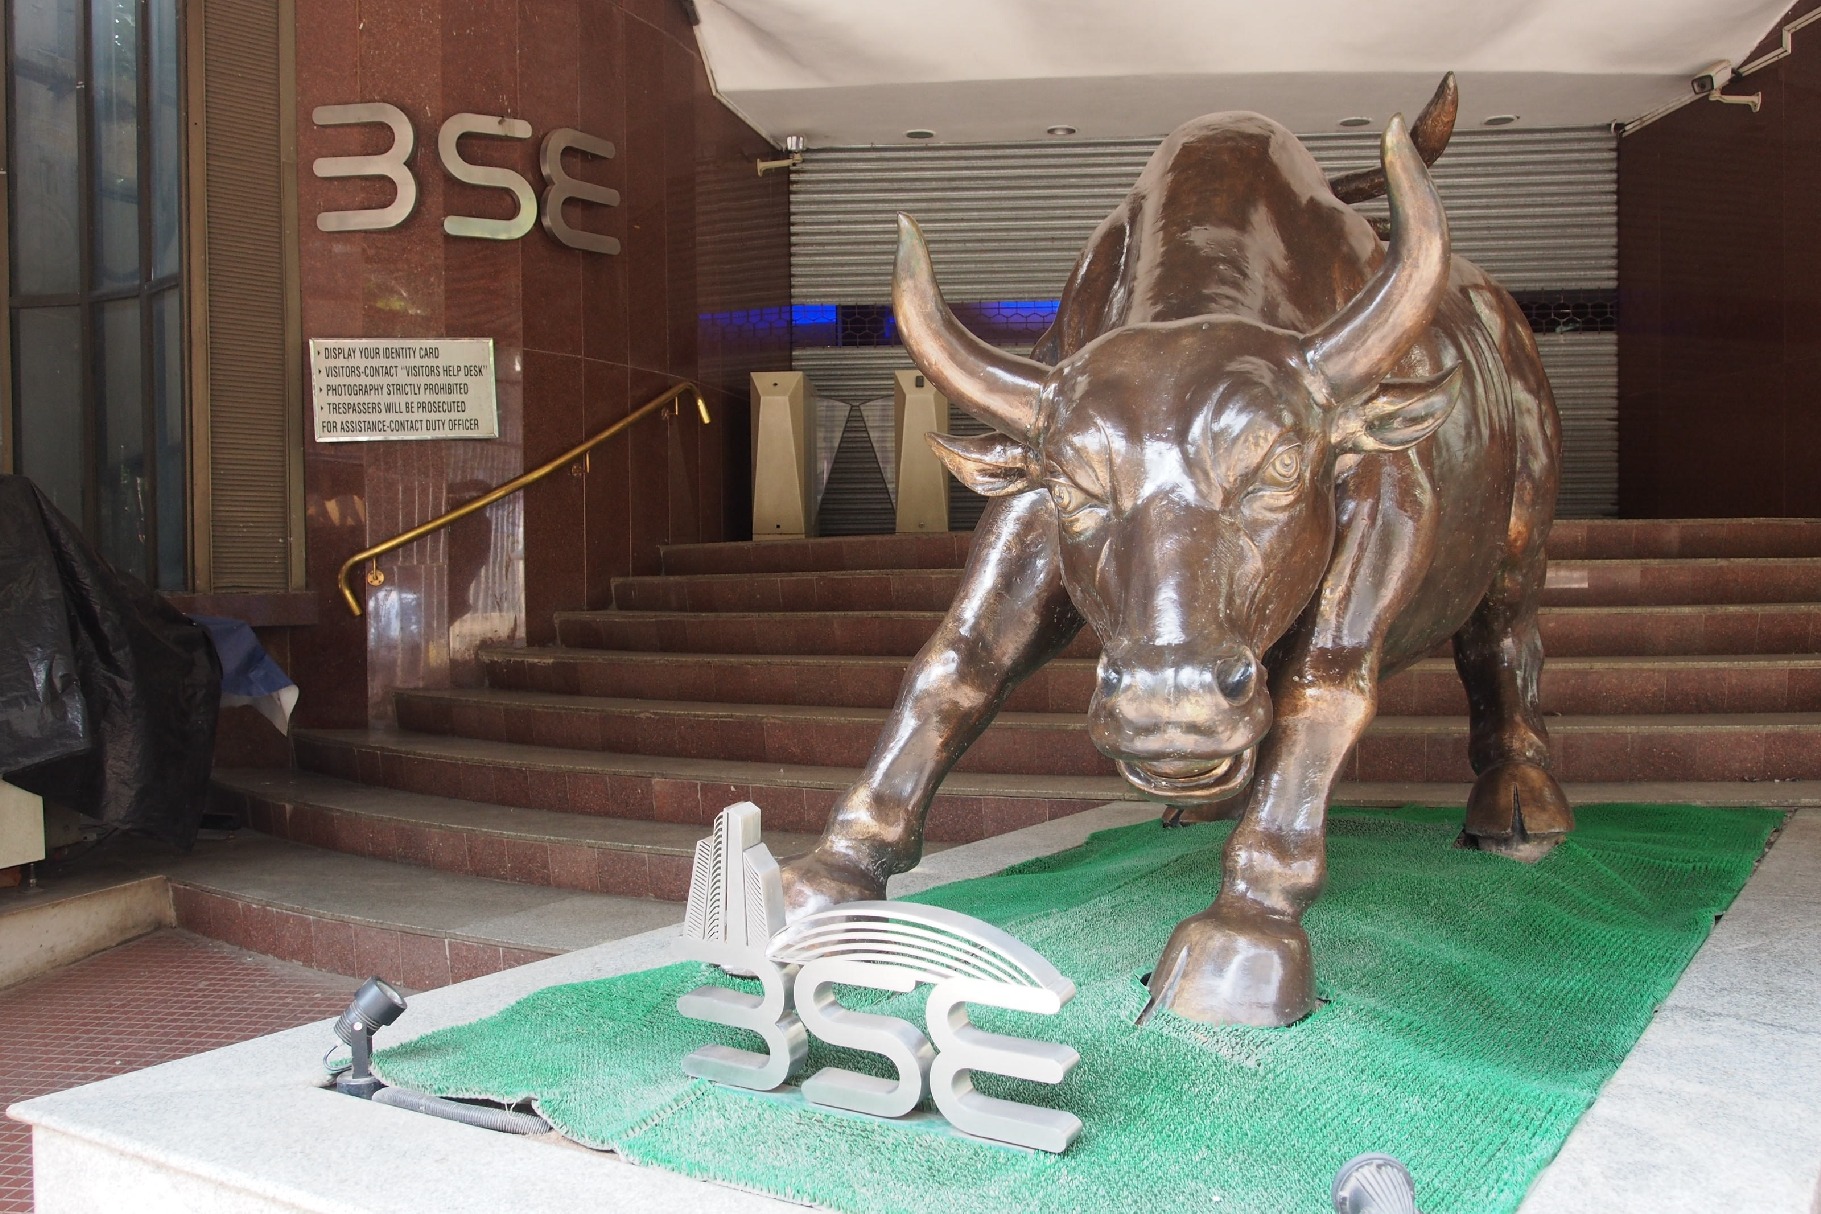 Sensex hits 50000 mark for first time ever